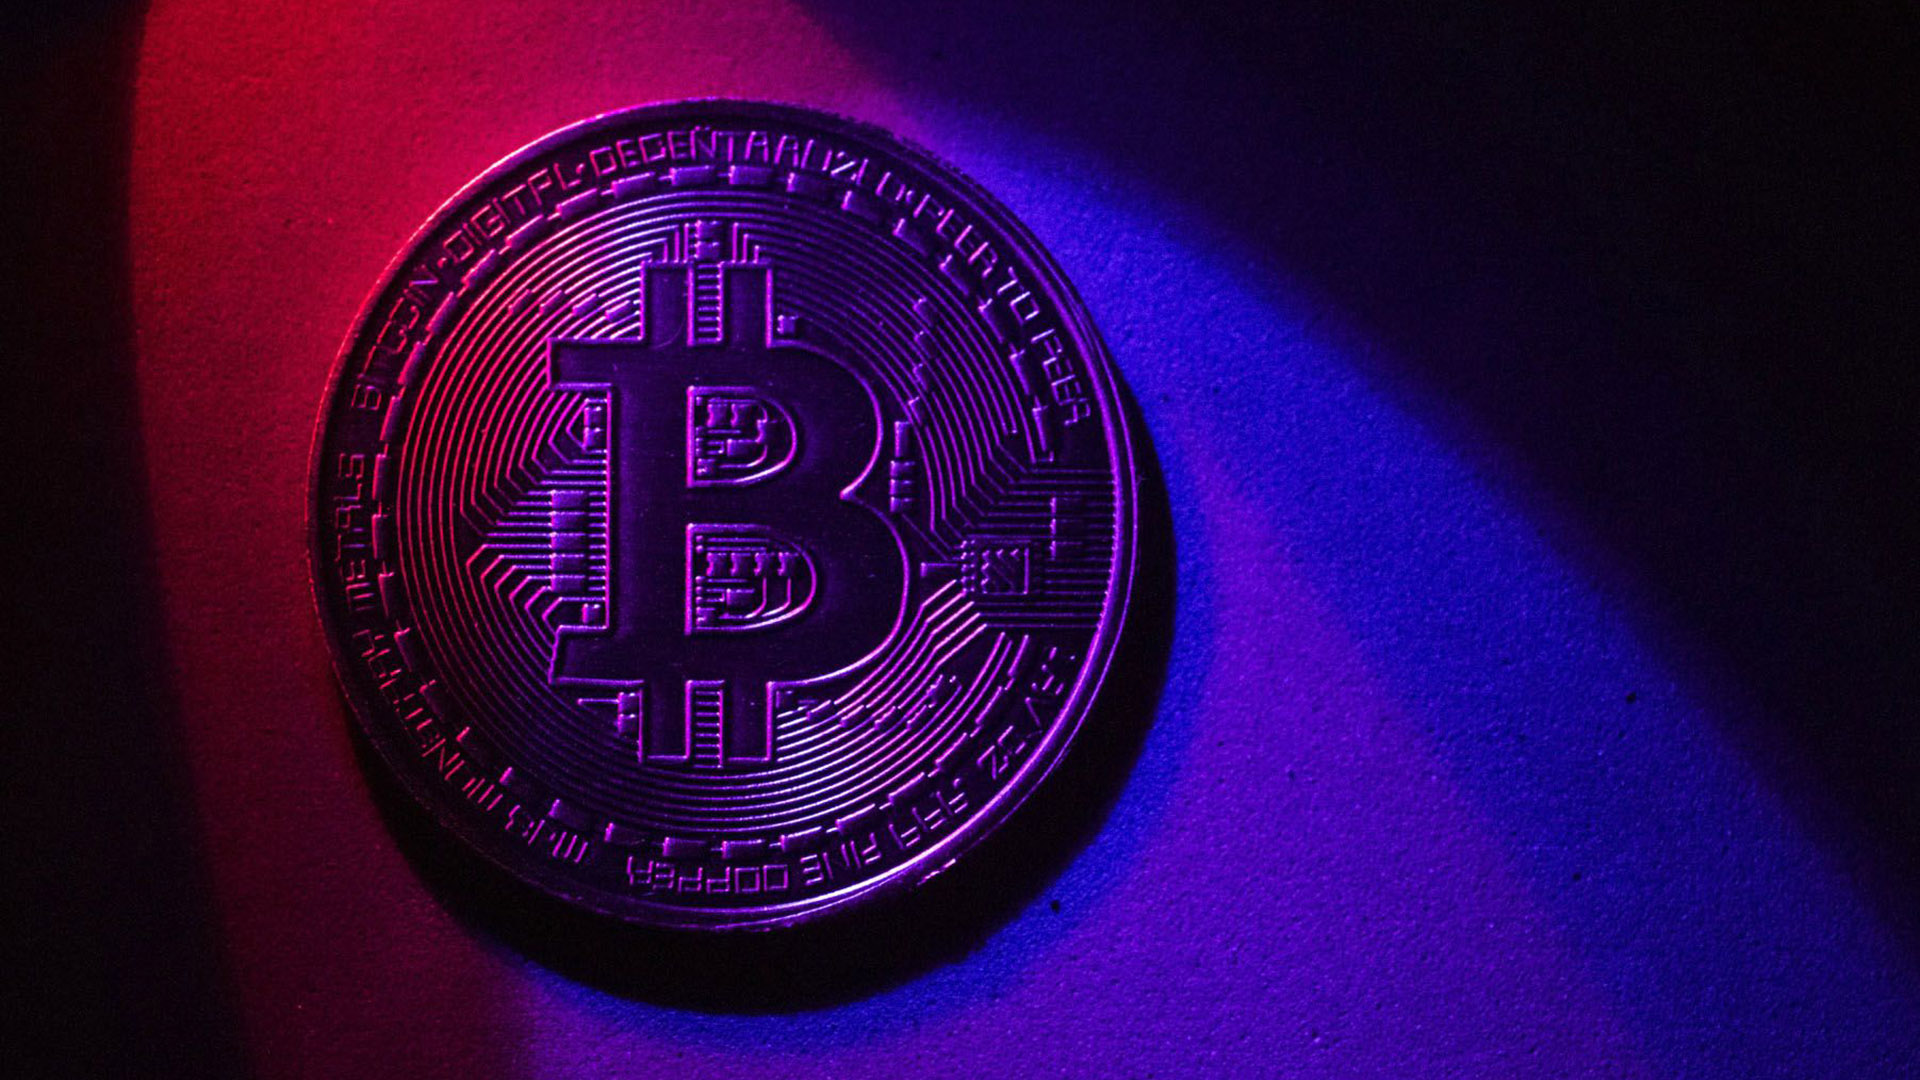 A novelty Bitcoin arranged in Sydney, Australia, on Friday, March 4, 2022. Bitcoin and other cryptocurrencies rose earlier in the week on the expectation that they might gain traction during Russia's invasion of Ukraine.  The advance was then stymied by concern about the effect of international sanctions against Russia.  Photographer: Brent Lewin/Bloomberg